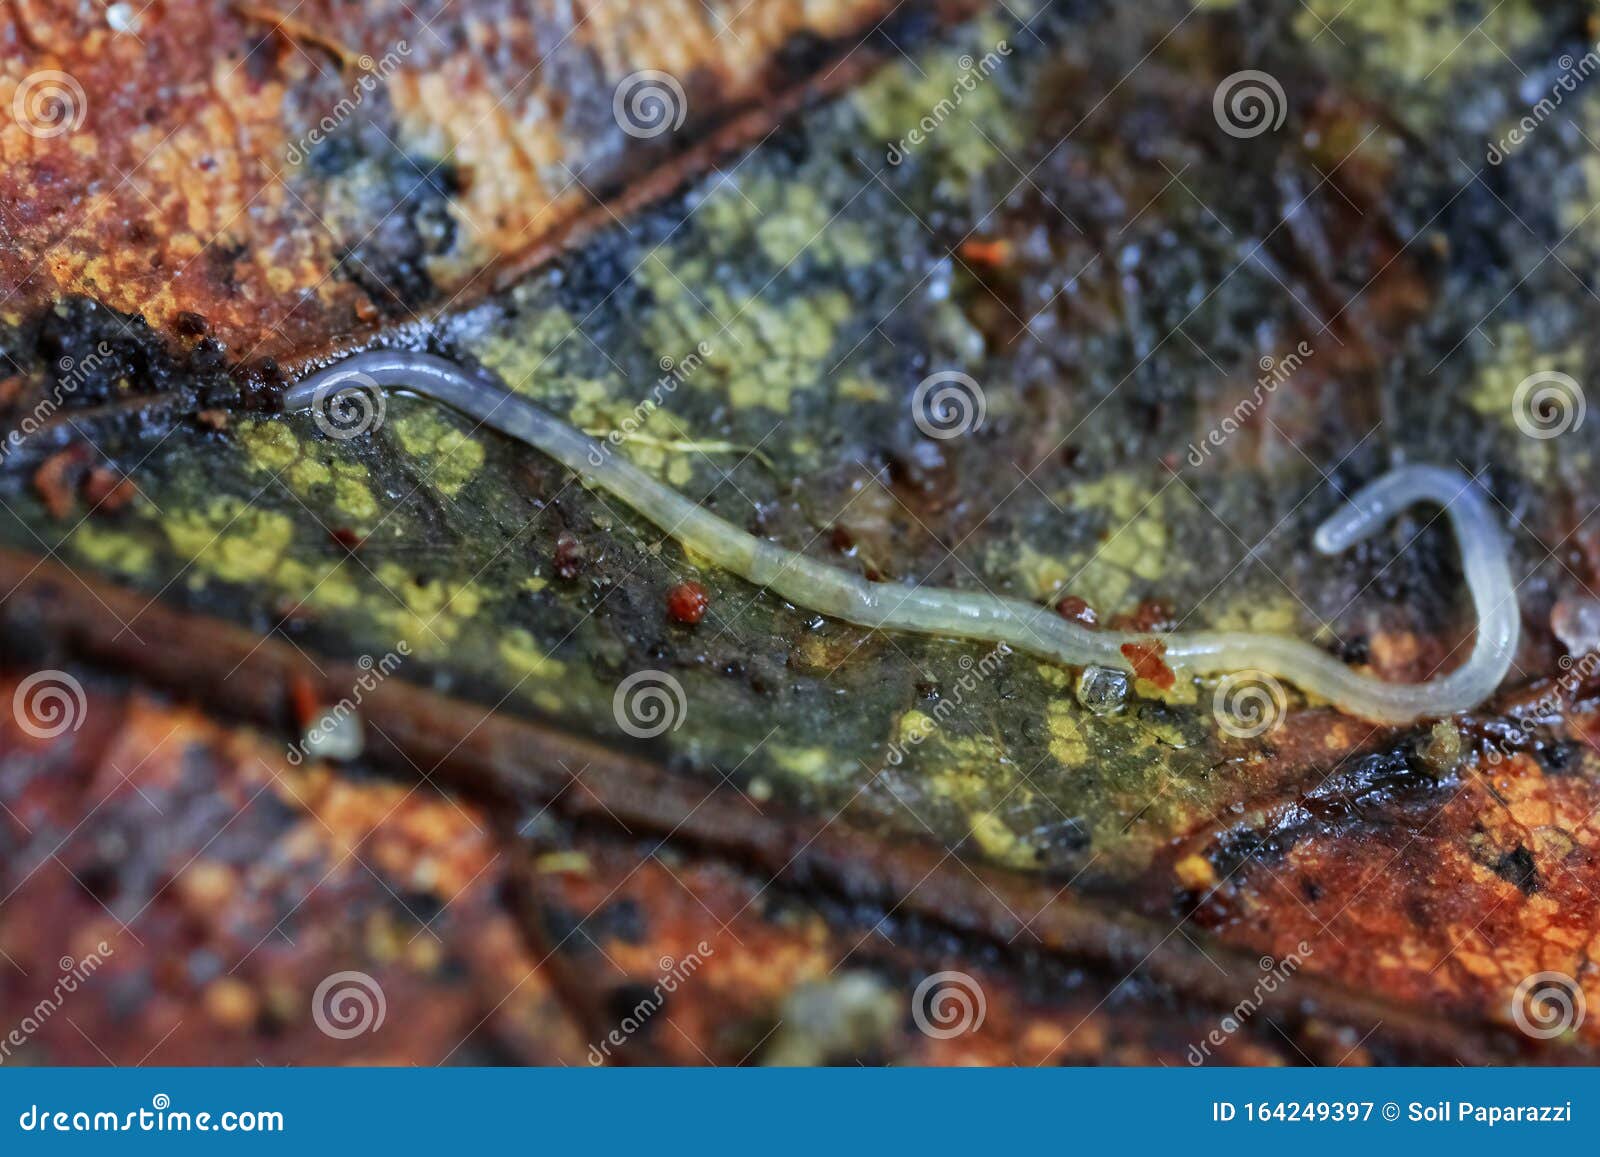 Enchytraeidae Lives on a Beech Leaf Stock Image - Image of view, poster ...